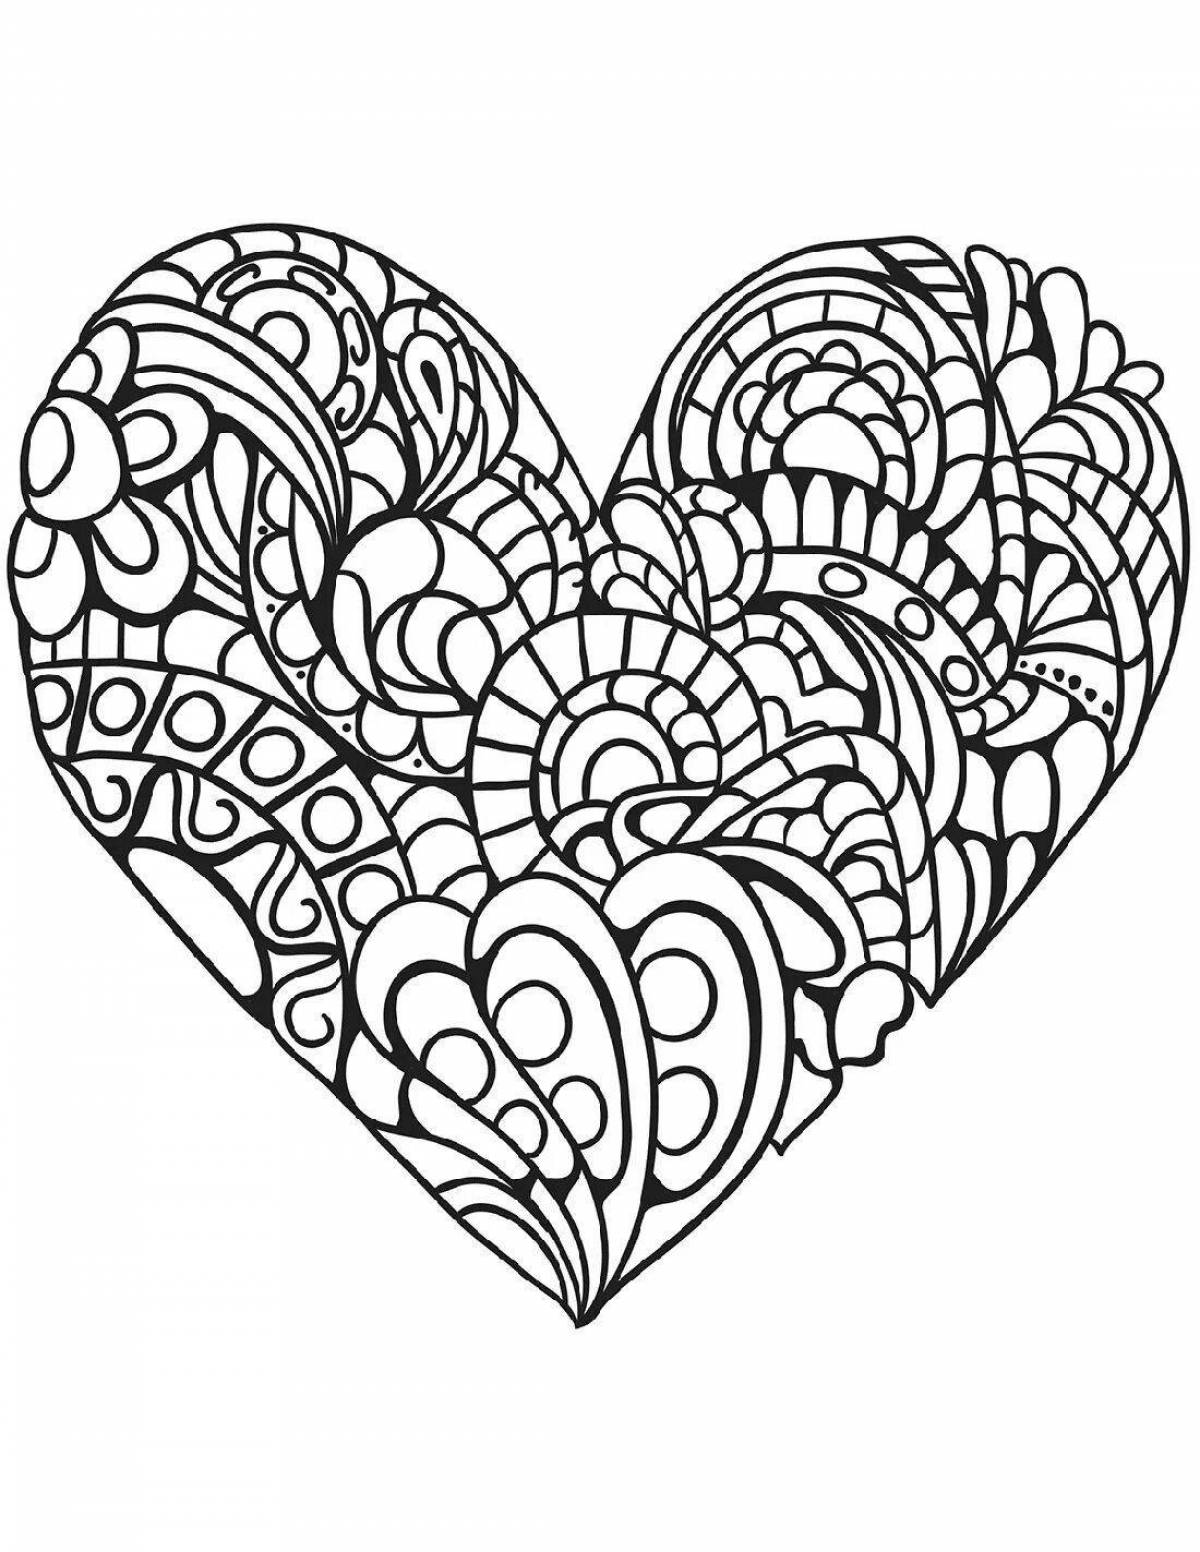 Serene intricate heart coloring page